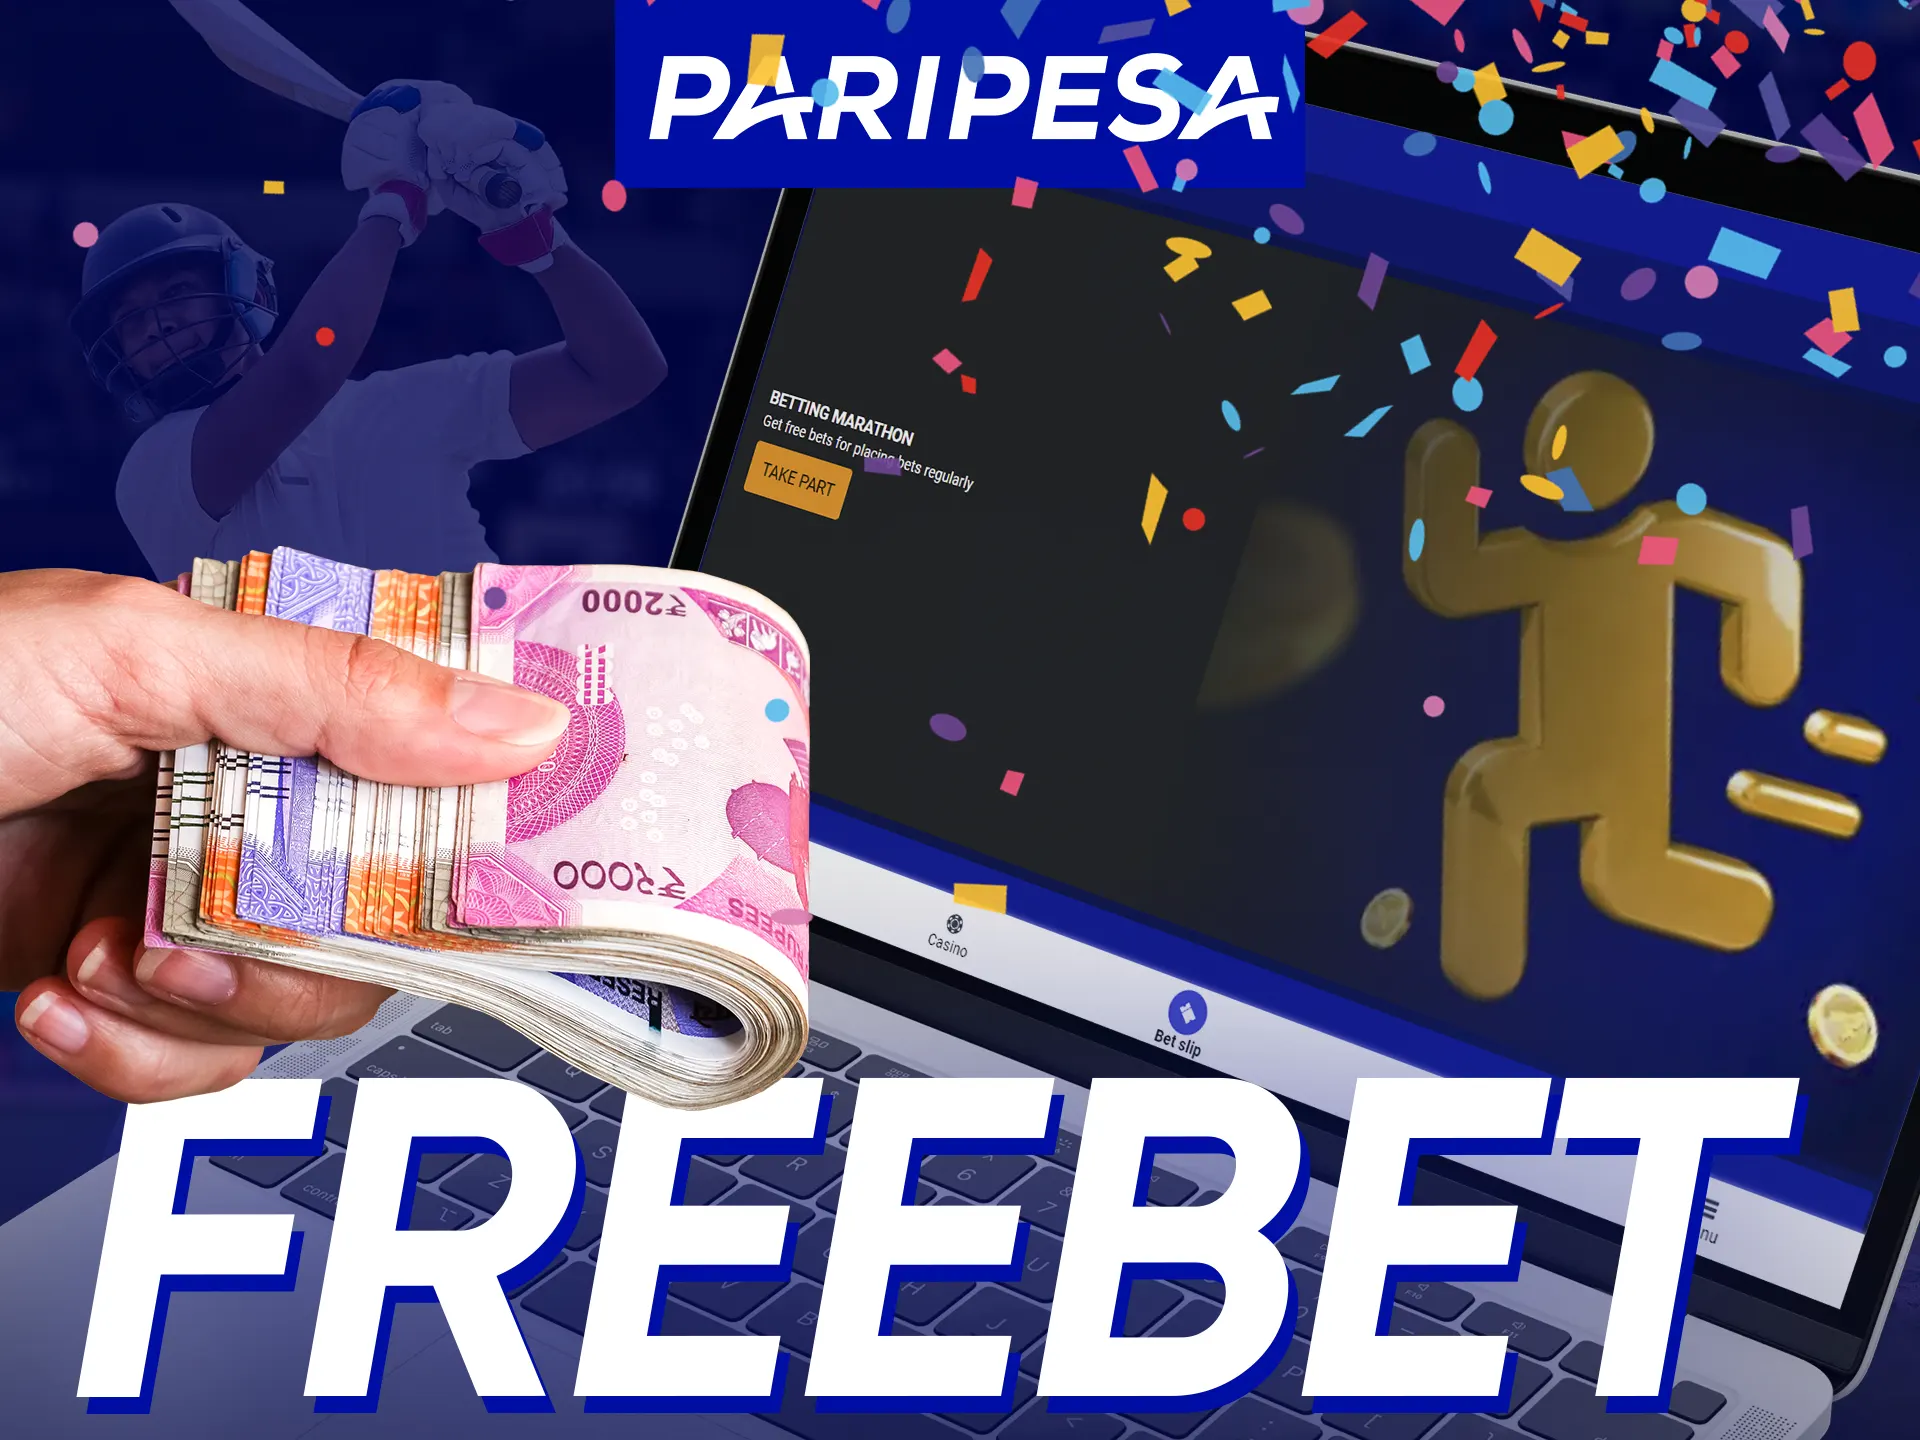 Place daily bets (180-1,800 INR) for freebet promo codes at Paripesa.